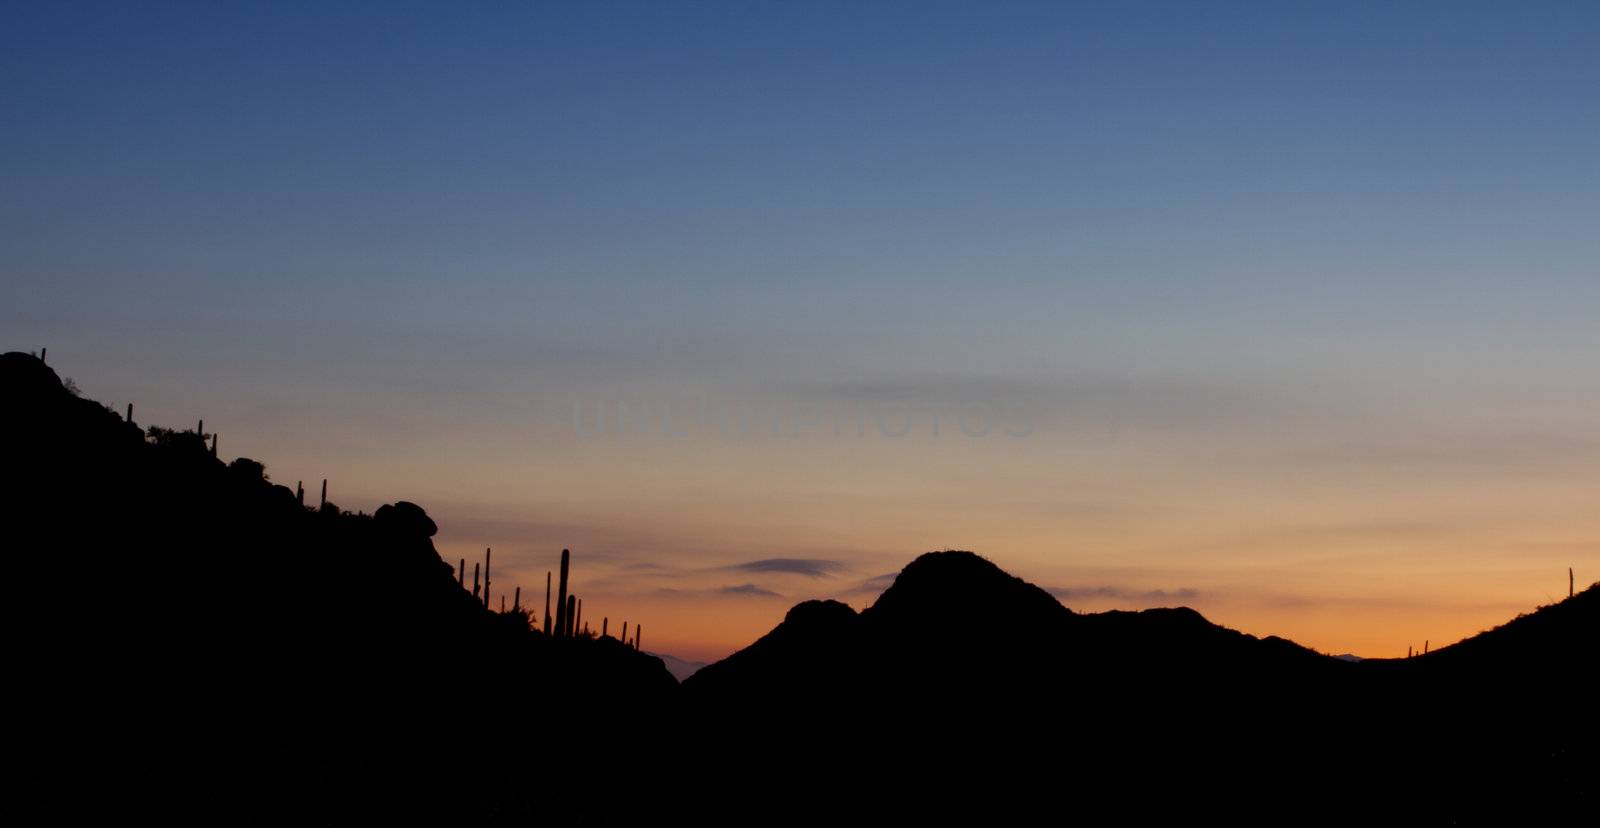 Sunrise at Gates Pass in Tucson Mountain Park, looking back toward city of Tucson, Arizona; copy space above;